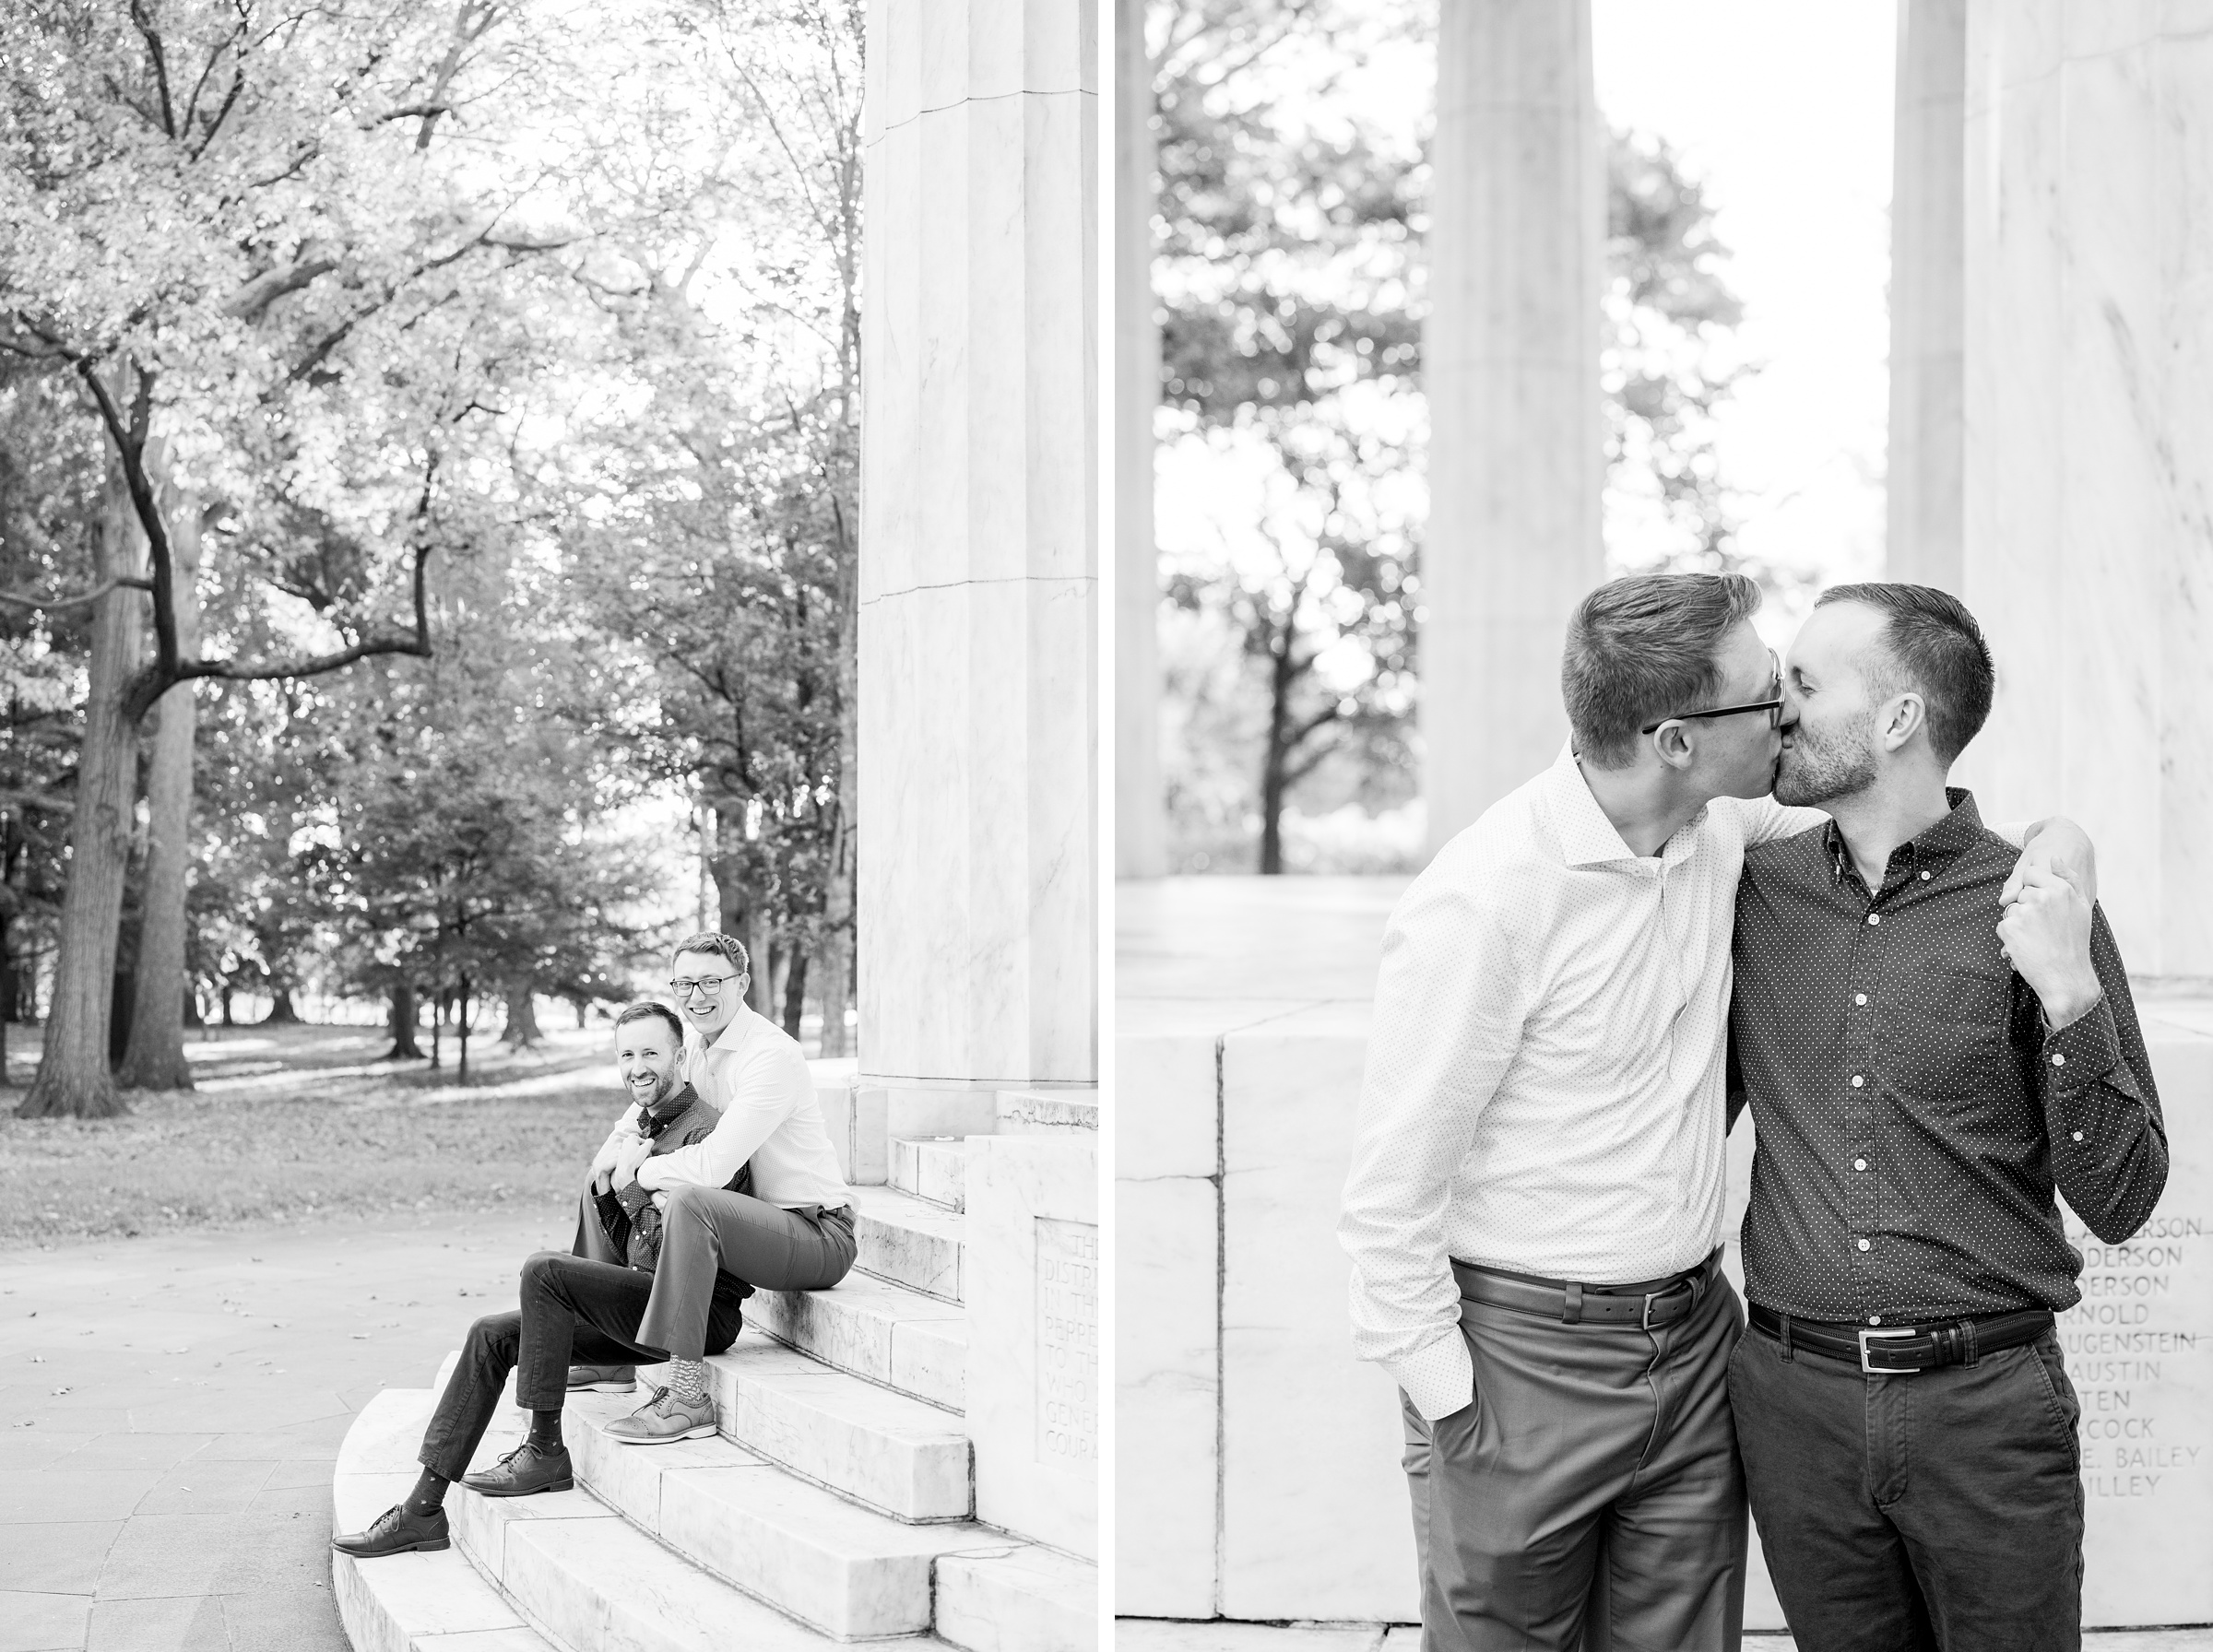 Engagement Photos on the National Mall in Washington, D.C. photographed by Baltimore Wedding Photographer Cait Kramer.